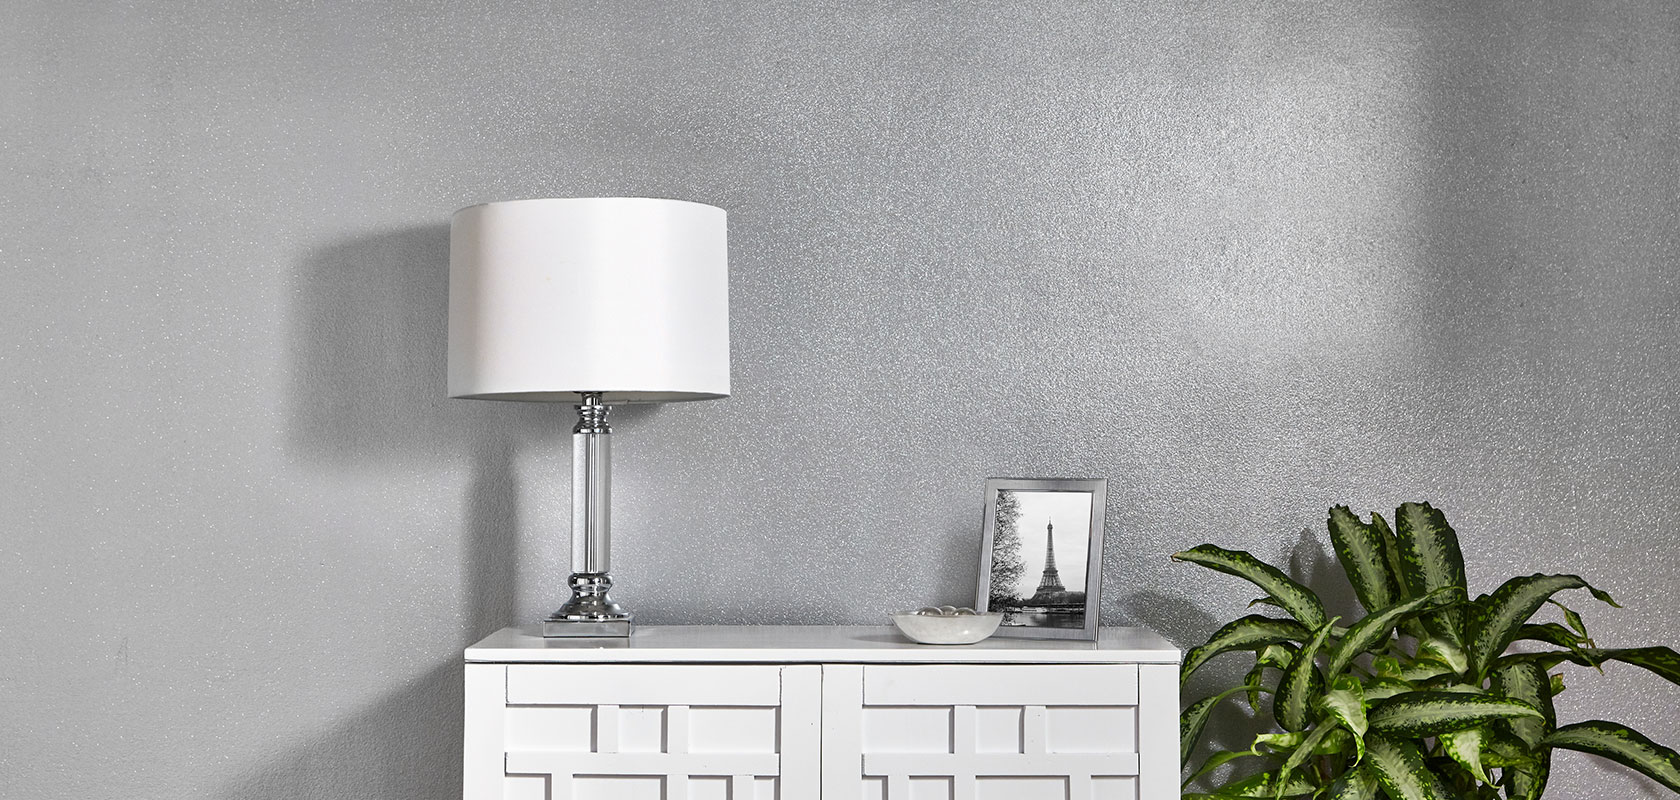 Silver Glitter Wall Paint Ideas chicago 2021